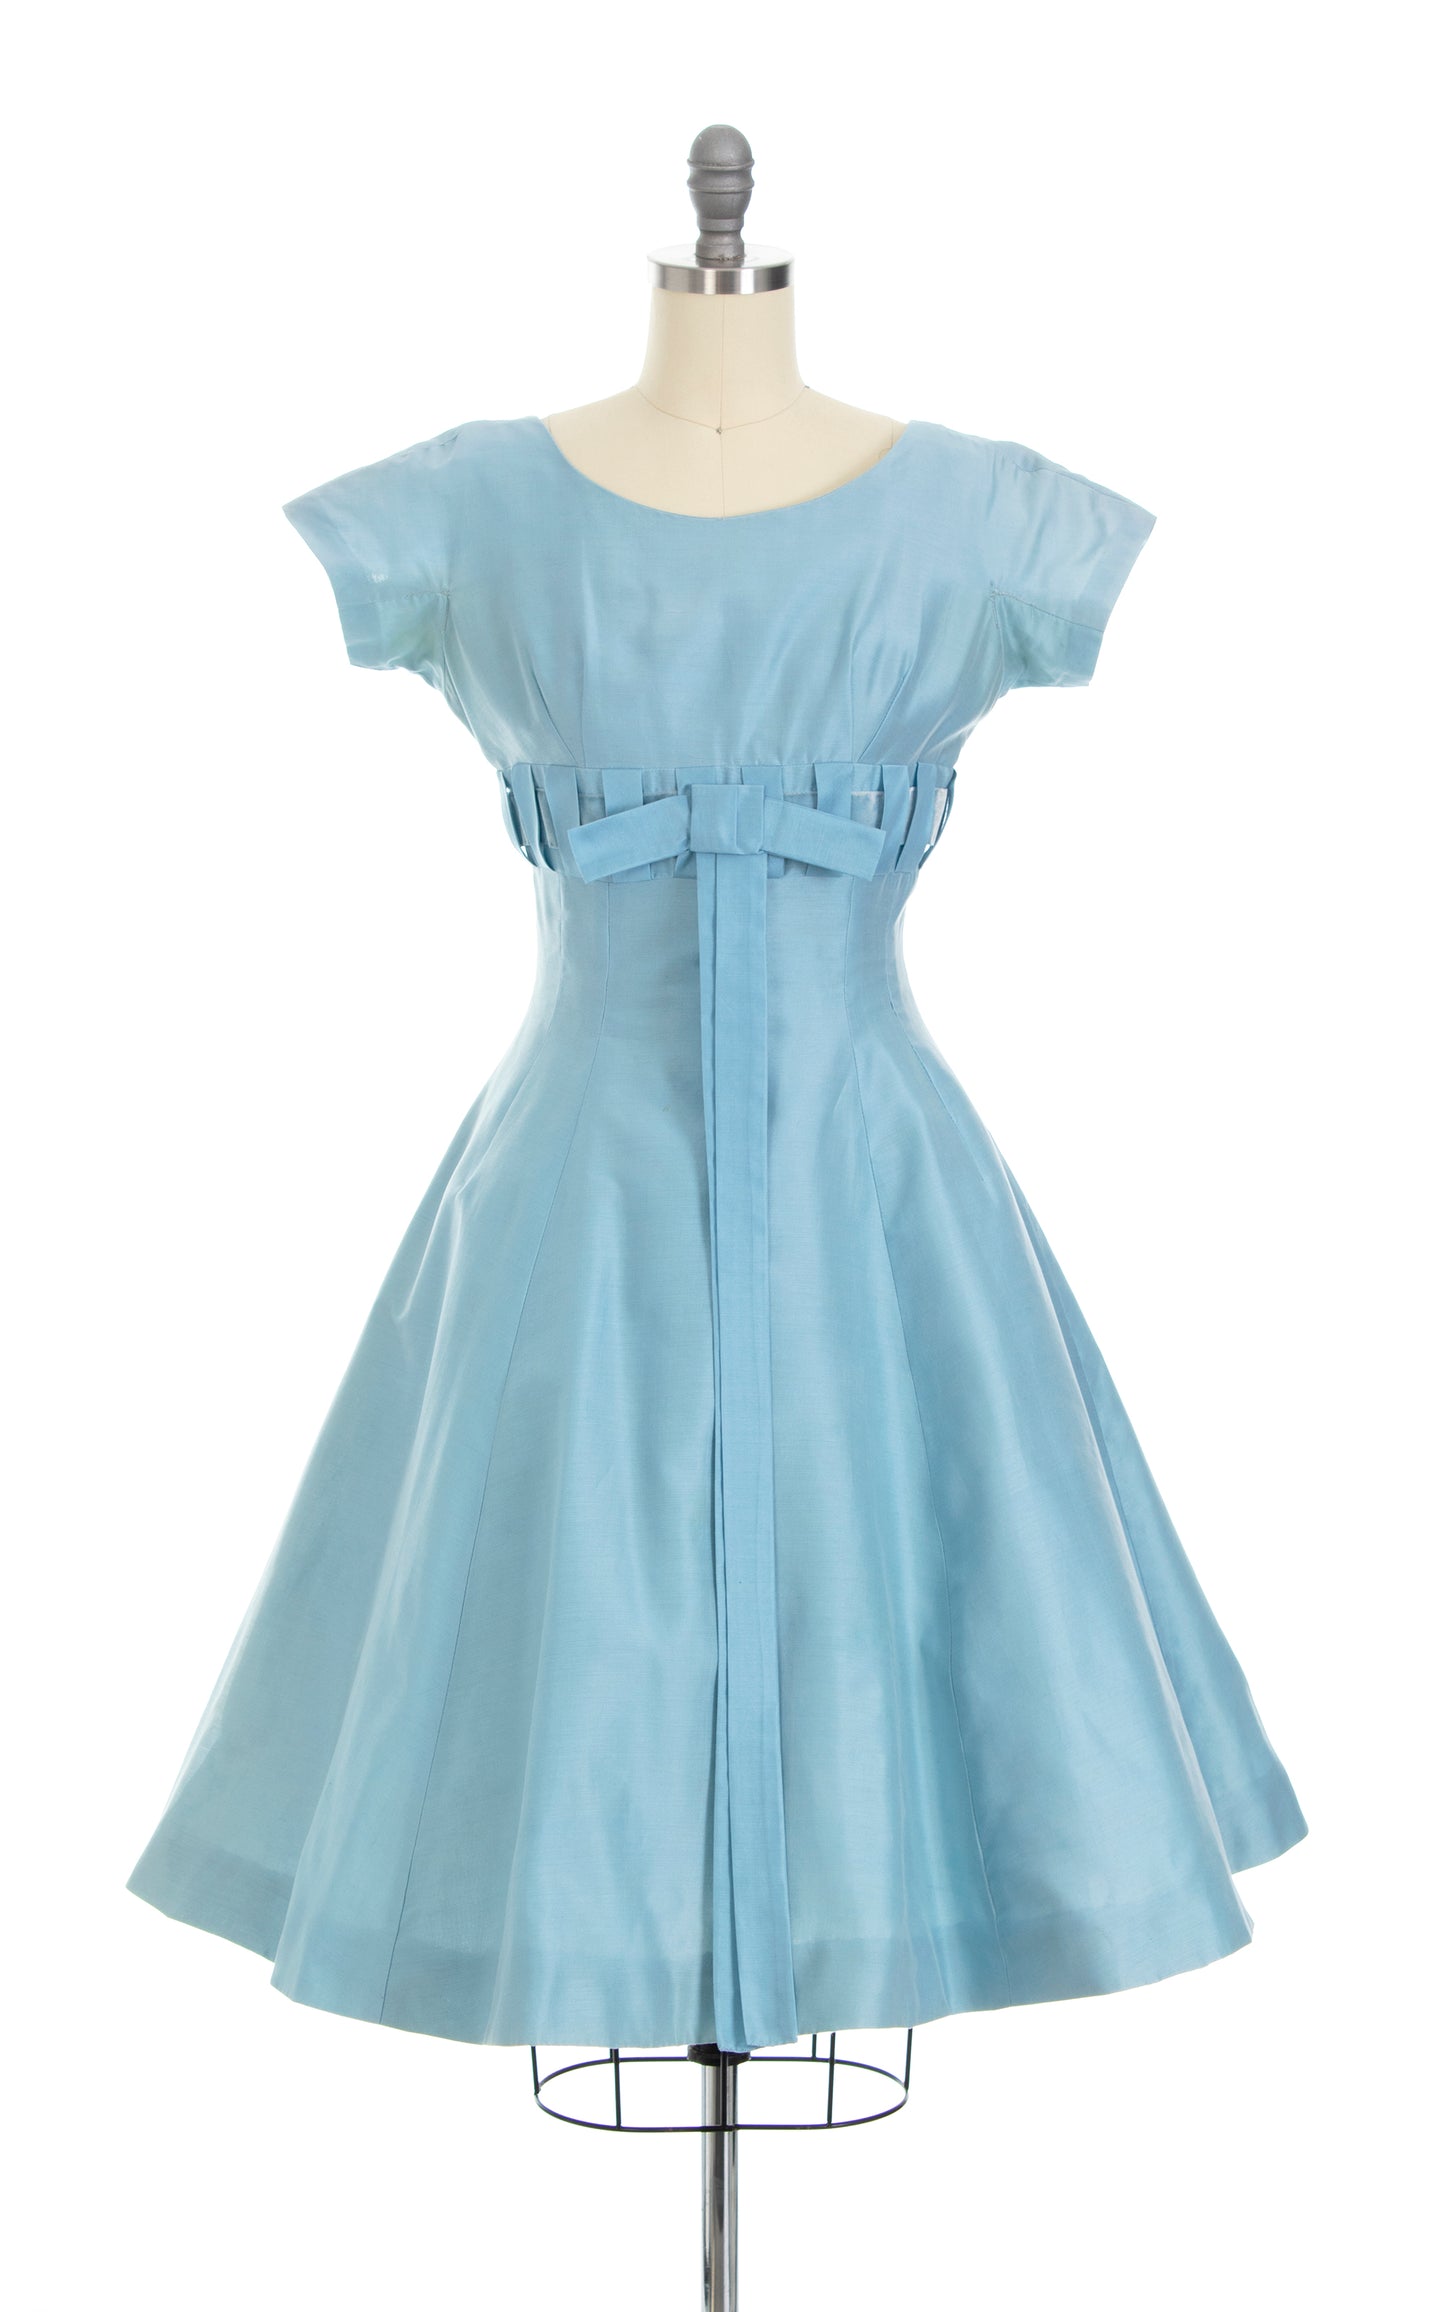 Vintage 1950s 50s Baby Blue Velvet Ribbon Bow Fit and Flare Party Dress Birthday Life Vintage